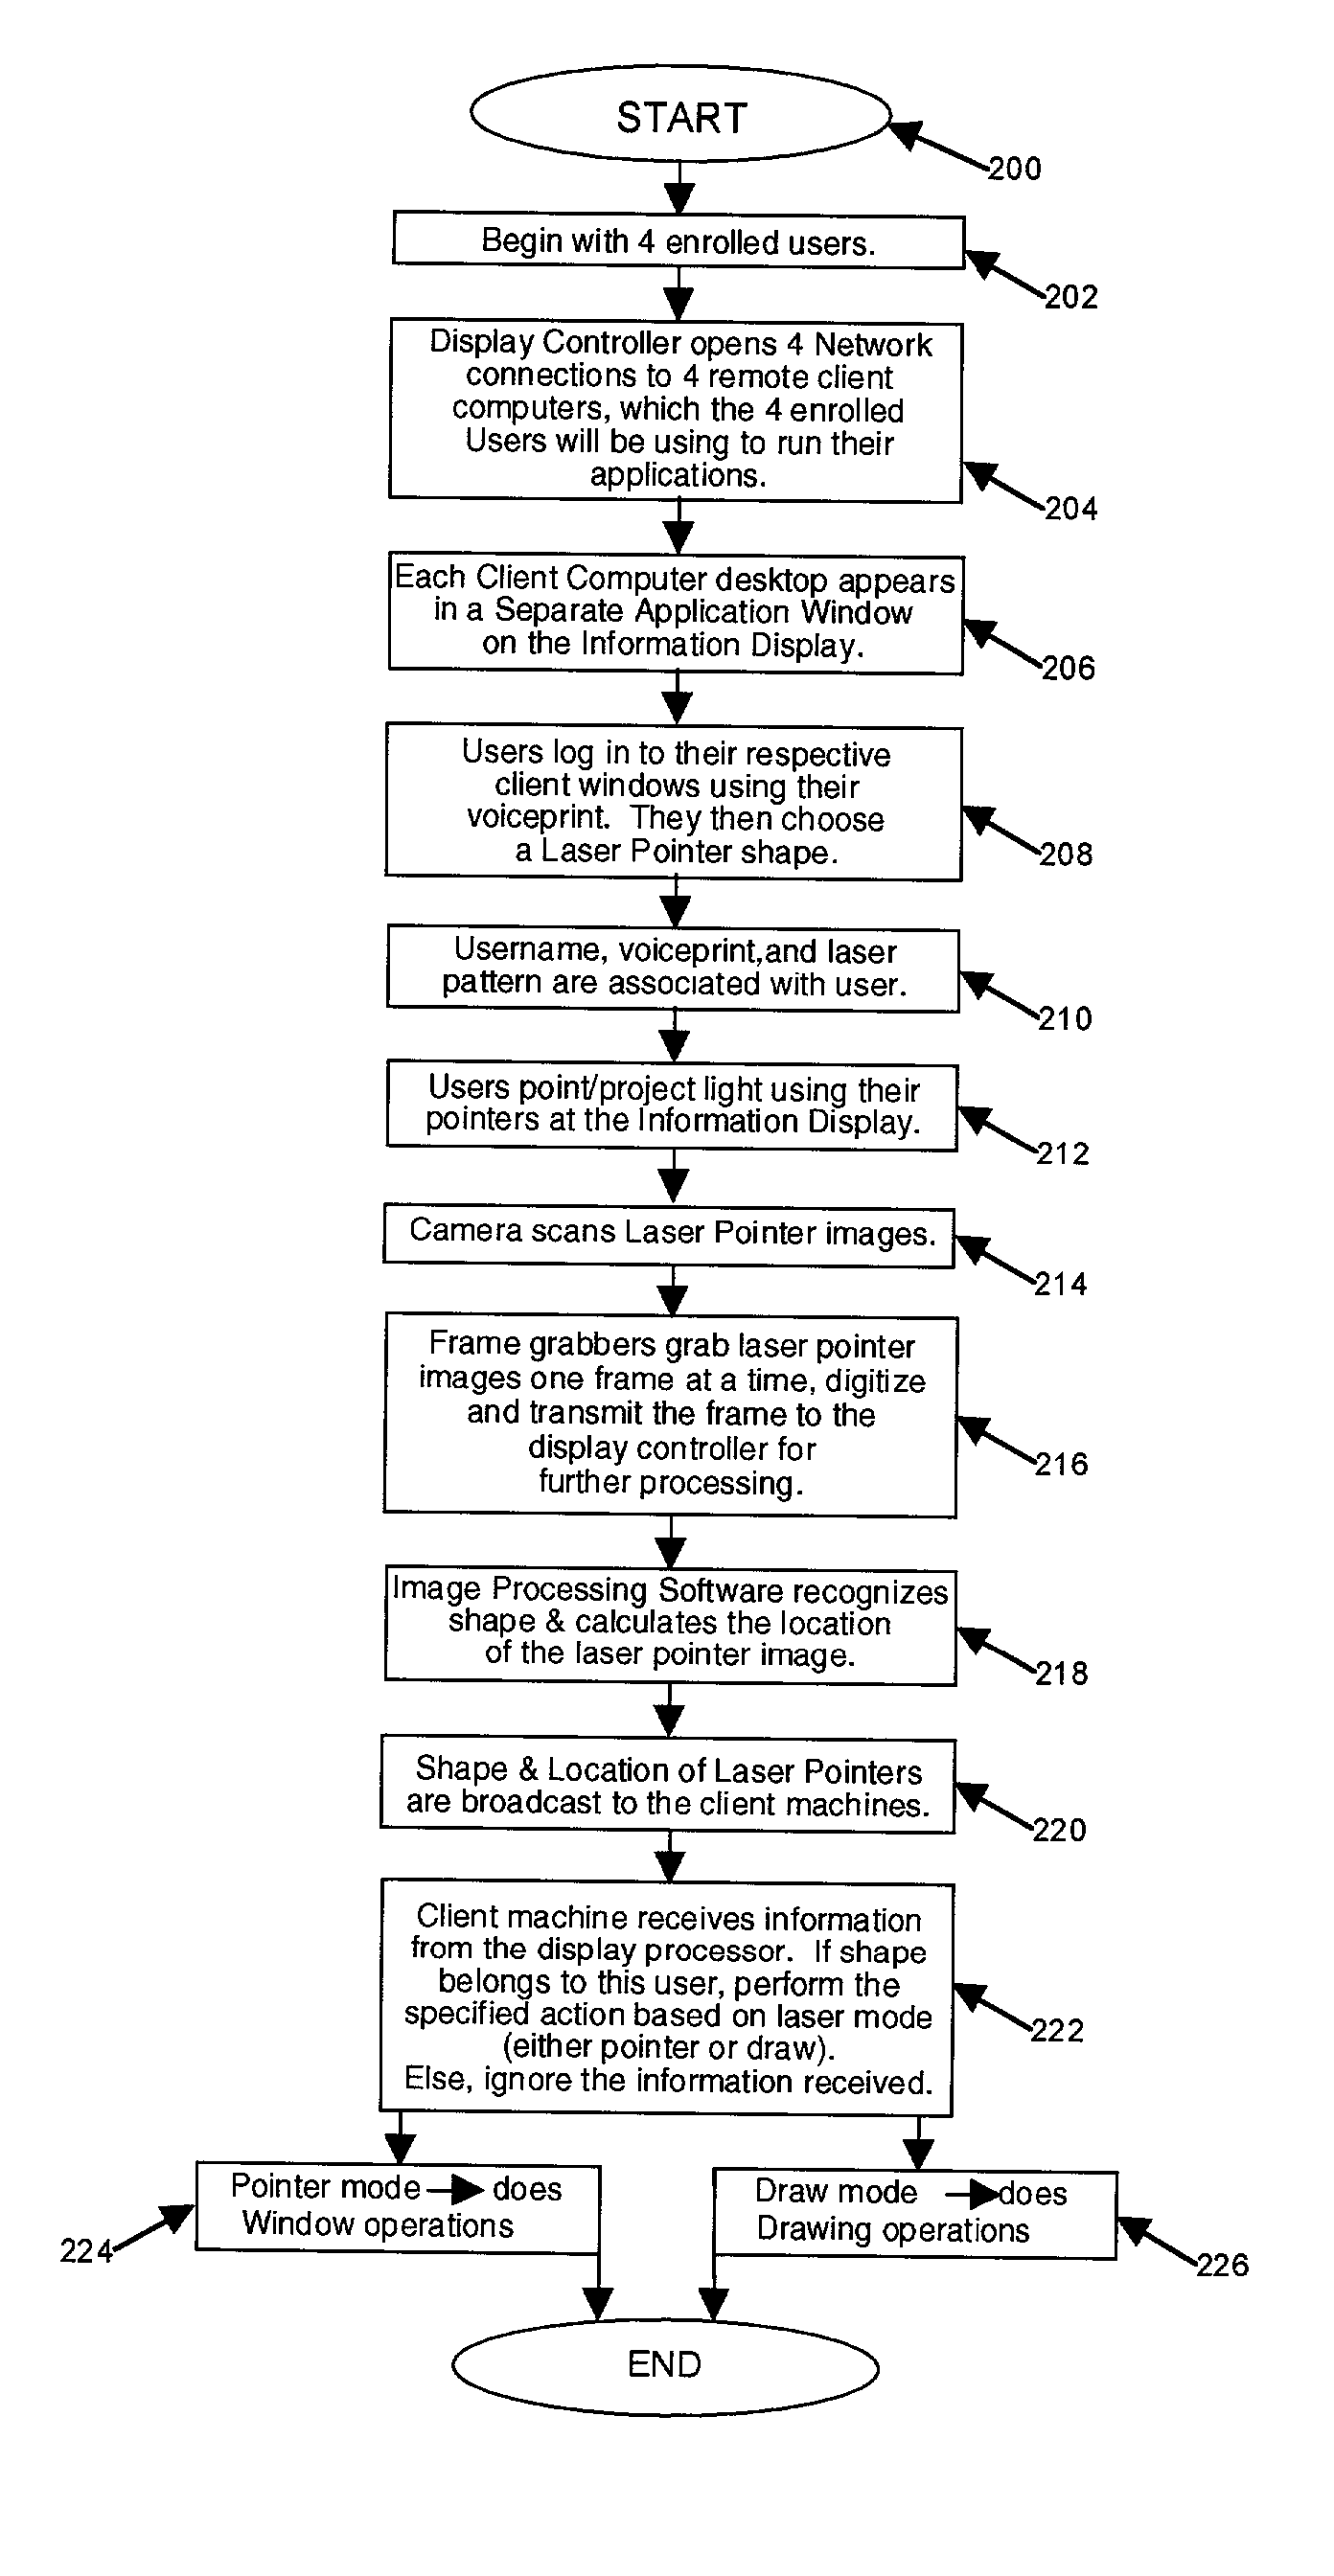 Apparatus and method for a multiple-user interface to interactive information displays